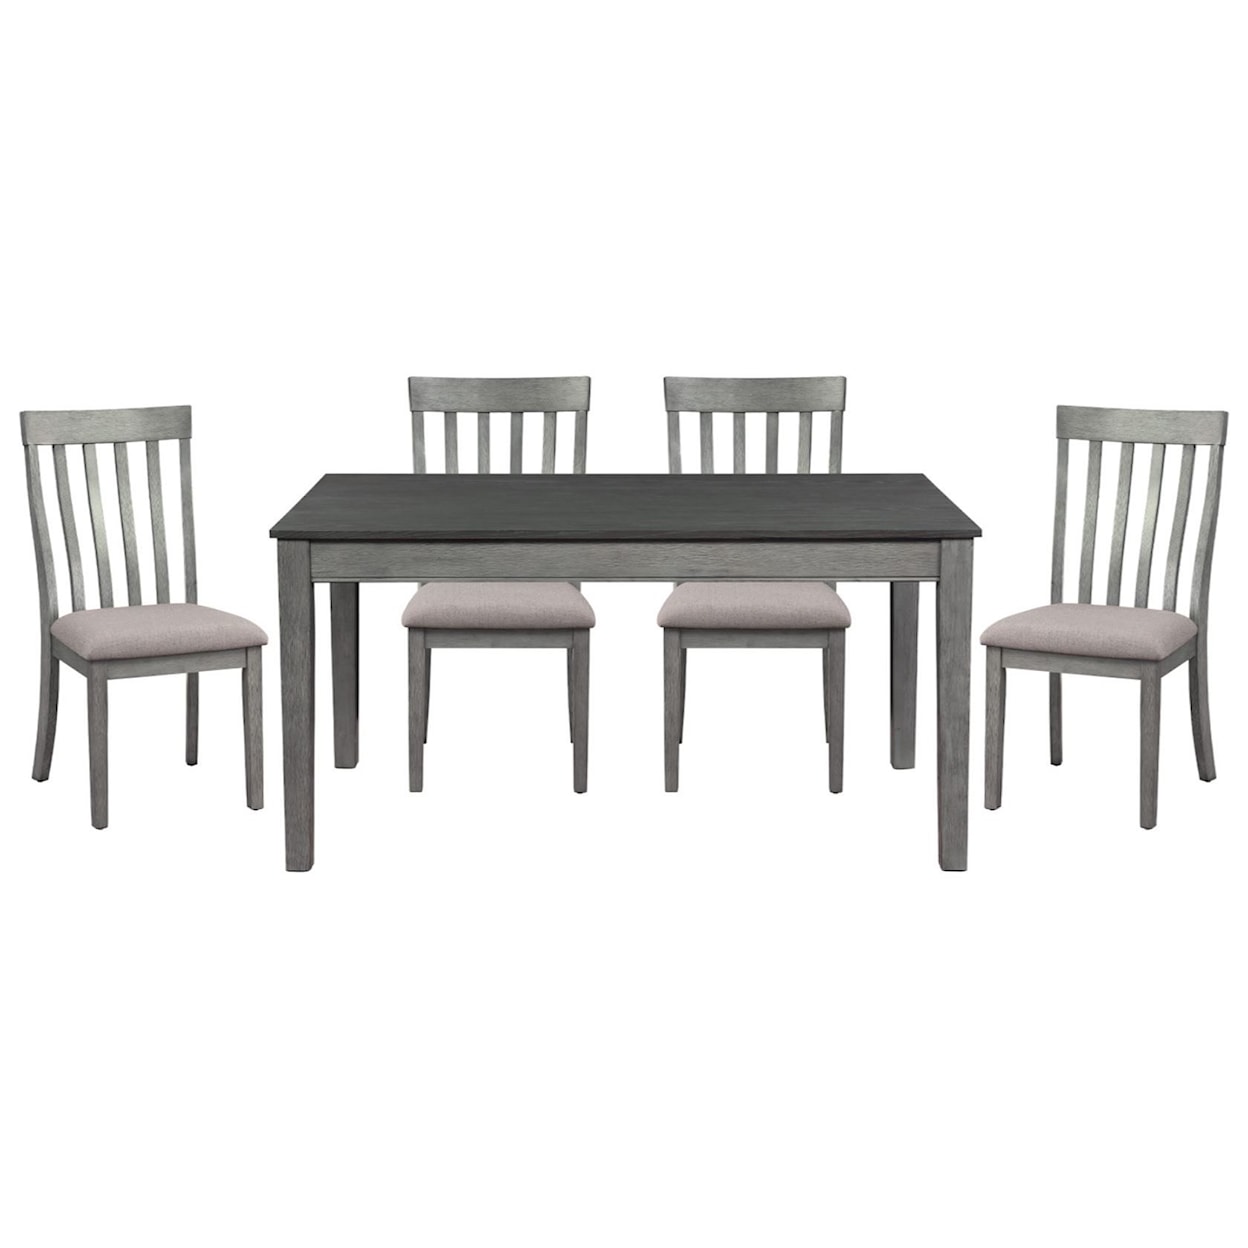 Homelegance Furniture Armhurst 5-Piece Table and Chair Set